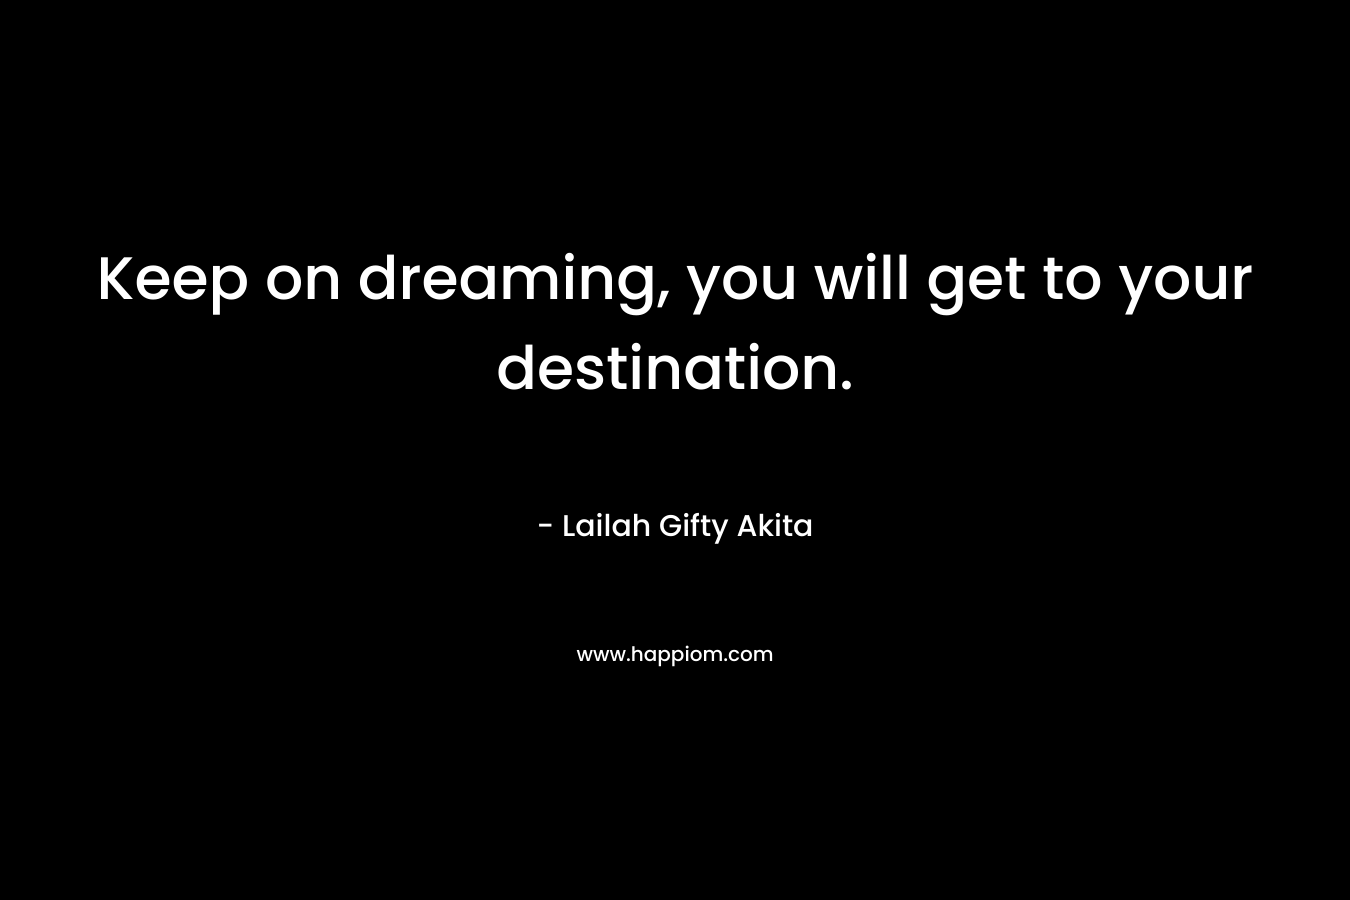 Keep on dreaming, you will get to your destination.